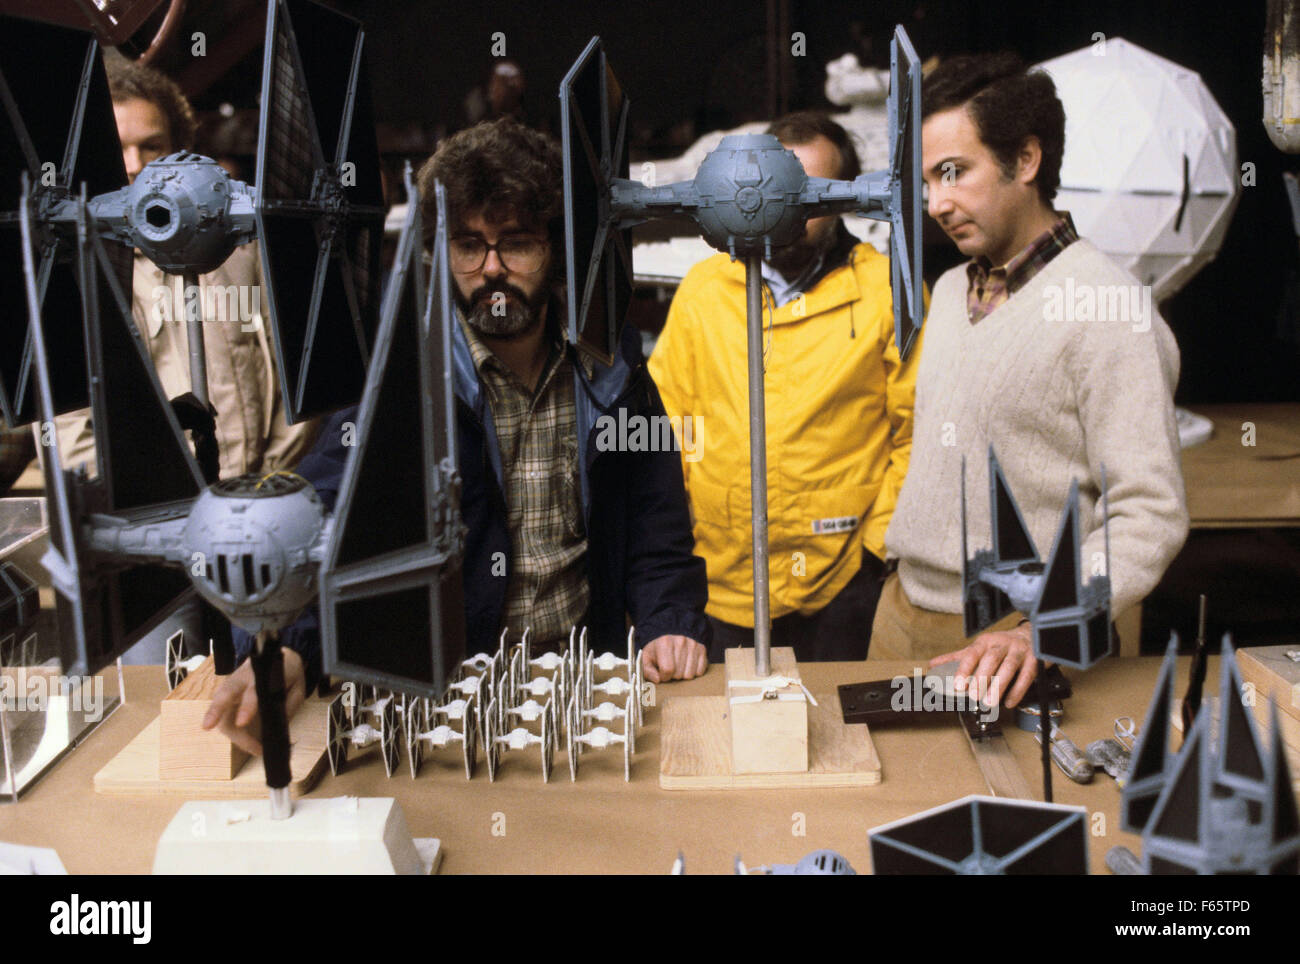 Star Wars: Episode IV - A New Hope Year : 1977 USA Director : George Lucas George Lucas Shooting picture Stock Photo